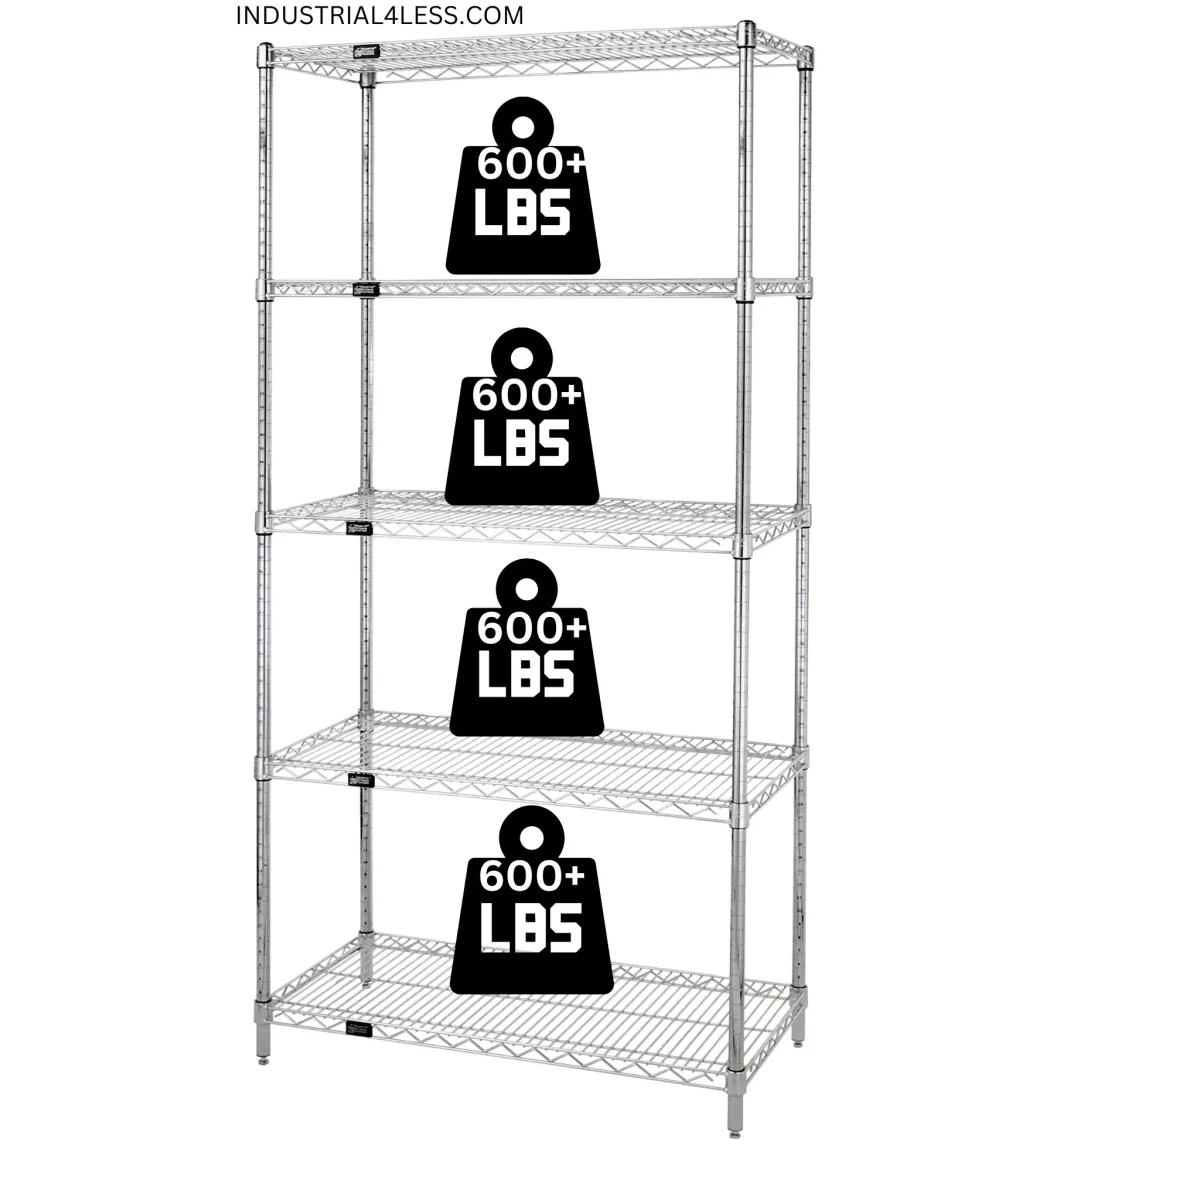 18" x 48" Stainless Steel Wire Shelving Unit - Industrial 4 Less - 18485S-5